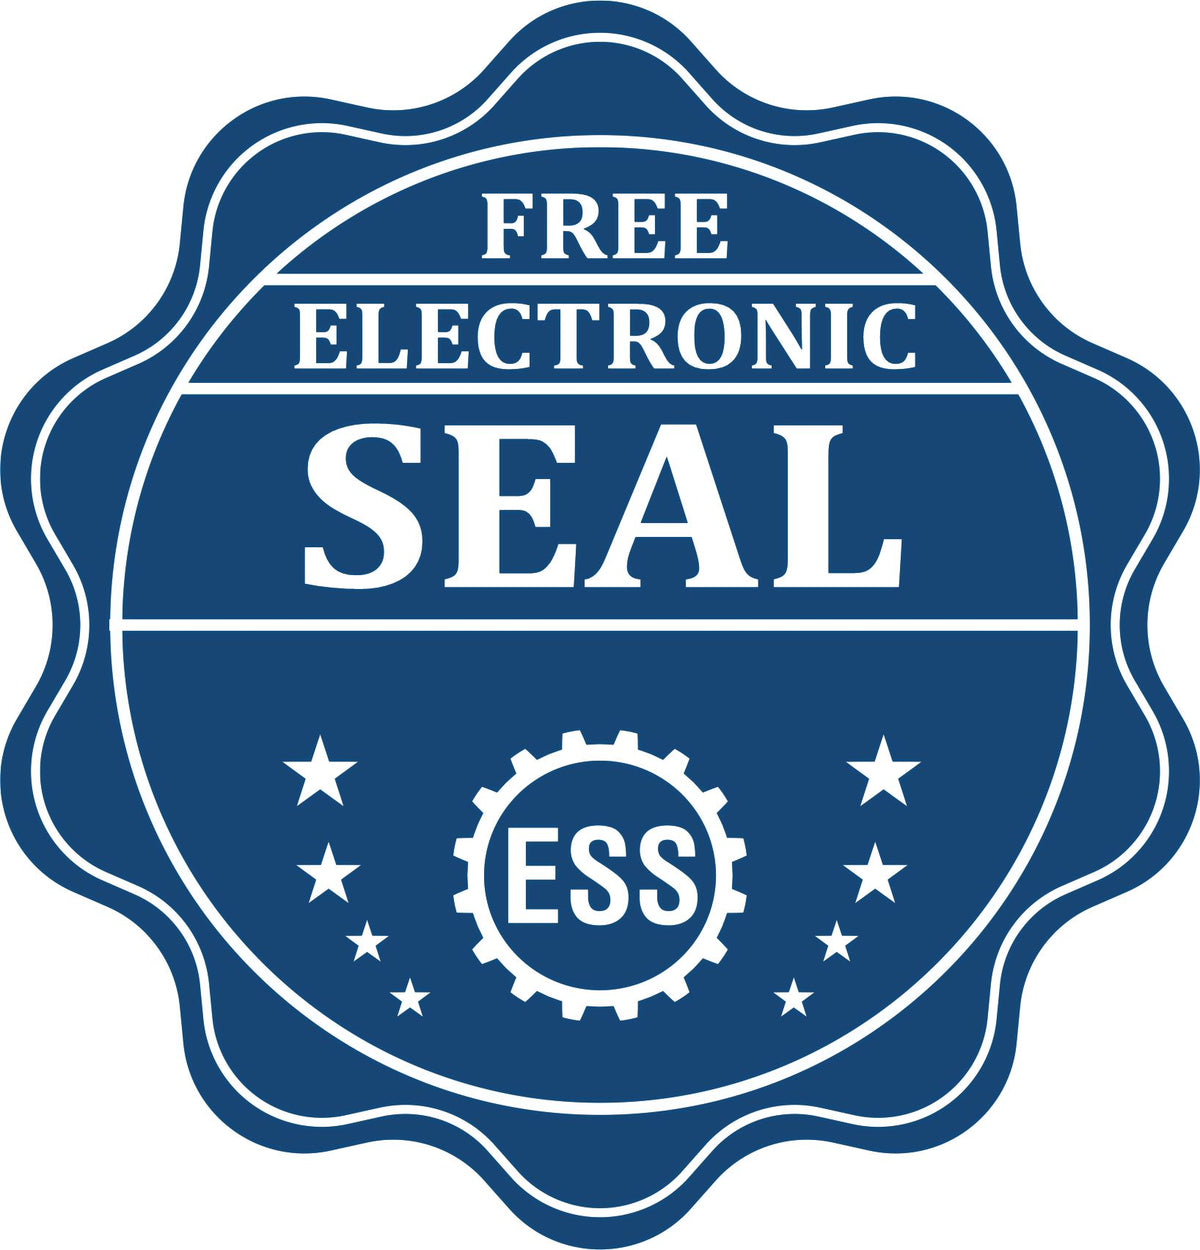 A badge showing a free electronic seal for the Hybrid Louisiana Landscape Architect Seal with stars and the ESS gear on the emblem.